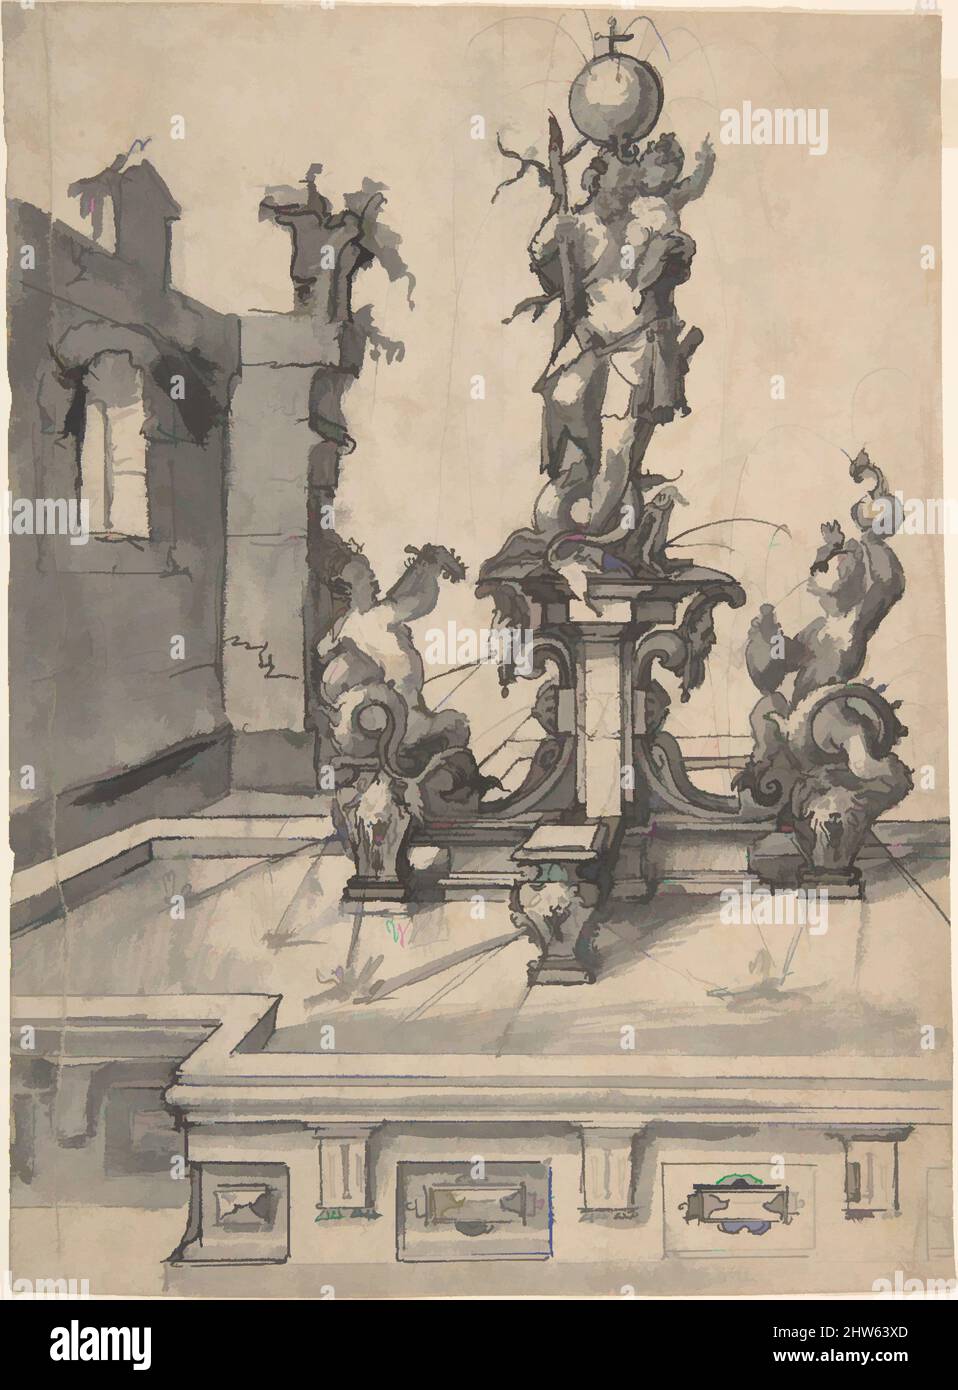 Art inspired by Design for an Elaborate Fountain Surmounted by a Statue of St. Christopher; verso: Studies of Architectural Details, 1550–99, Pen and black ink, brush and grey wash; verso: black chalk and pen and black ink, sheet: 9 5/8 x 7 1/16 in. (24.4 x 18 cm), Wendel Dietterlin, Classic works modernized by Artotop with a splash of modernity. Shapes, color and value, eye-catching visual impact on art. Emotions through freedom of artworks in a contemporary way. A timeless message pursuing a wildly creative new direction. Artists turning to the digital medium and creating the Artotop NFT Stock Photo